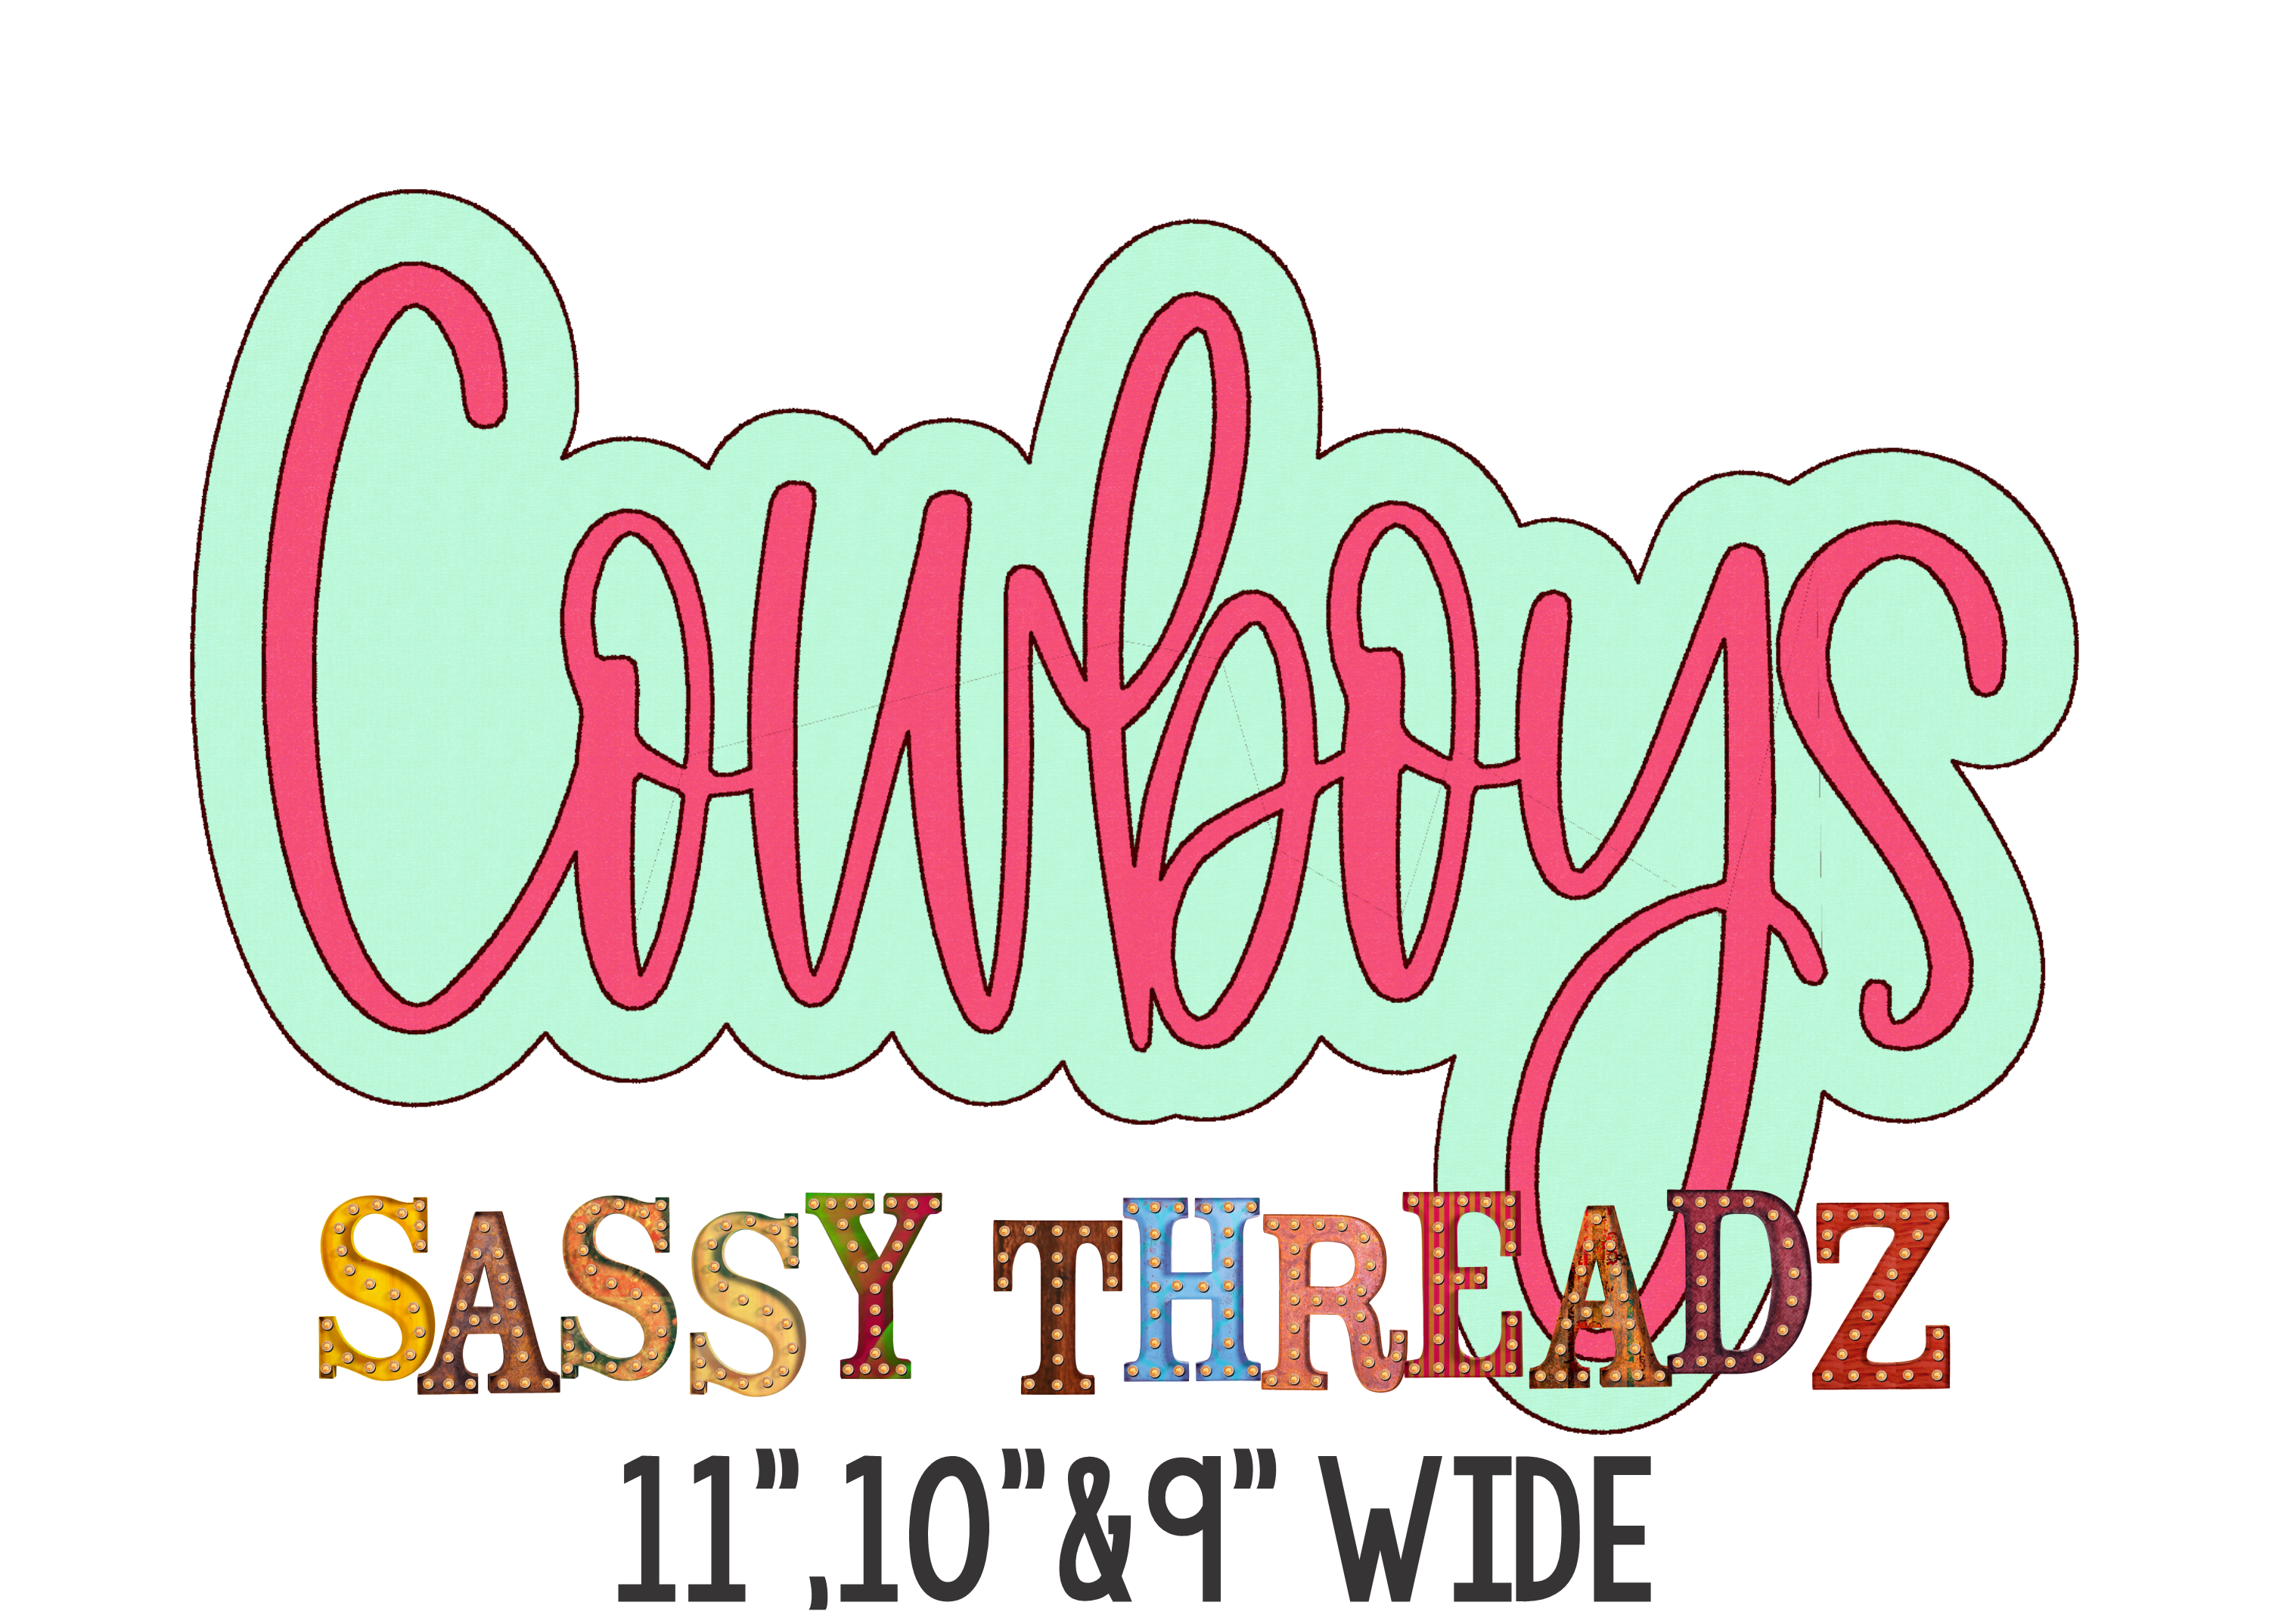 Cowboys Bean Stitch Script Stacked Embroidery Download